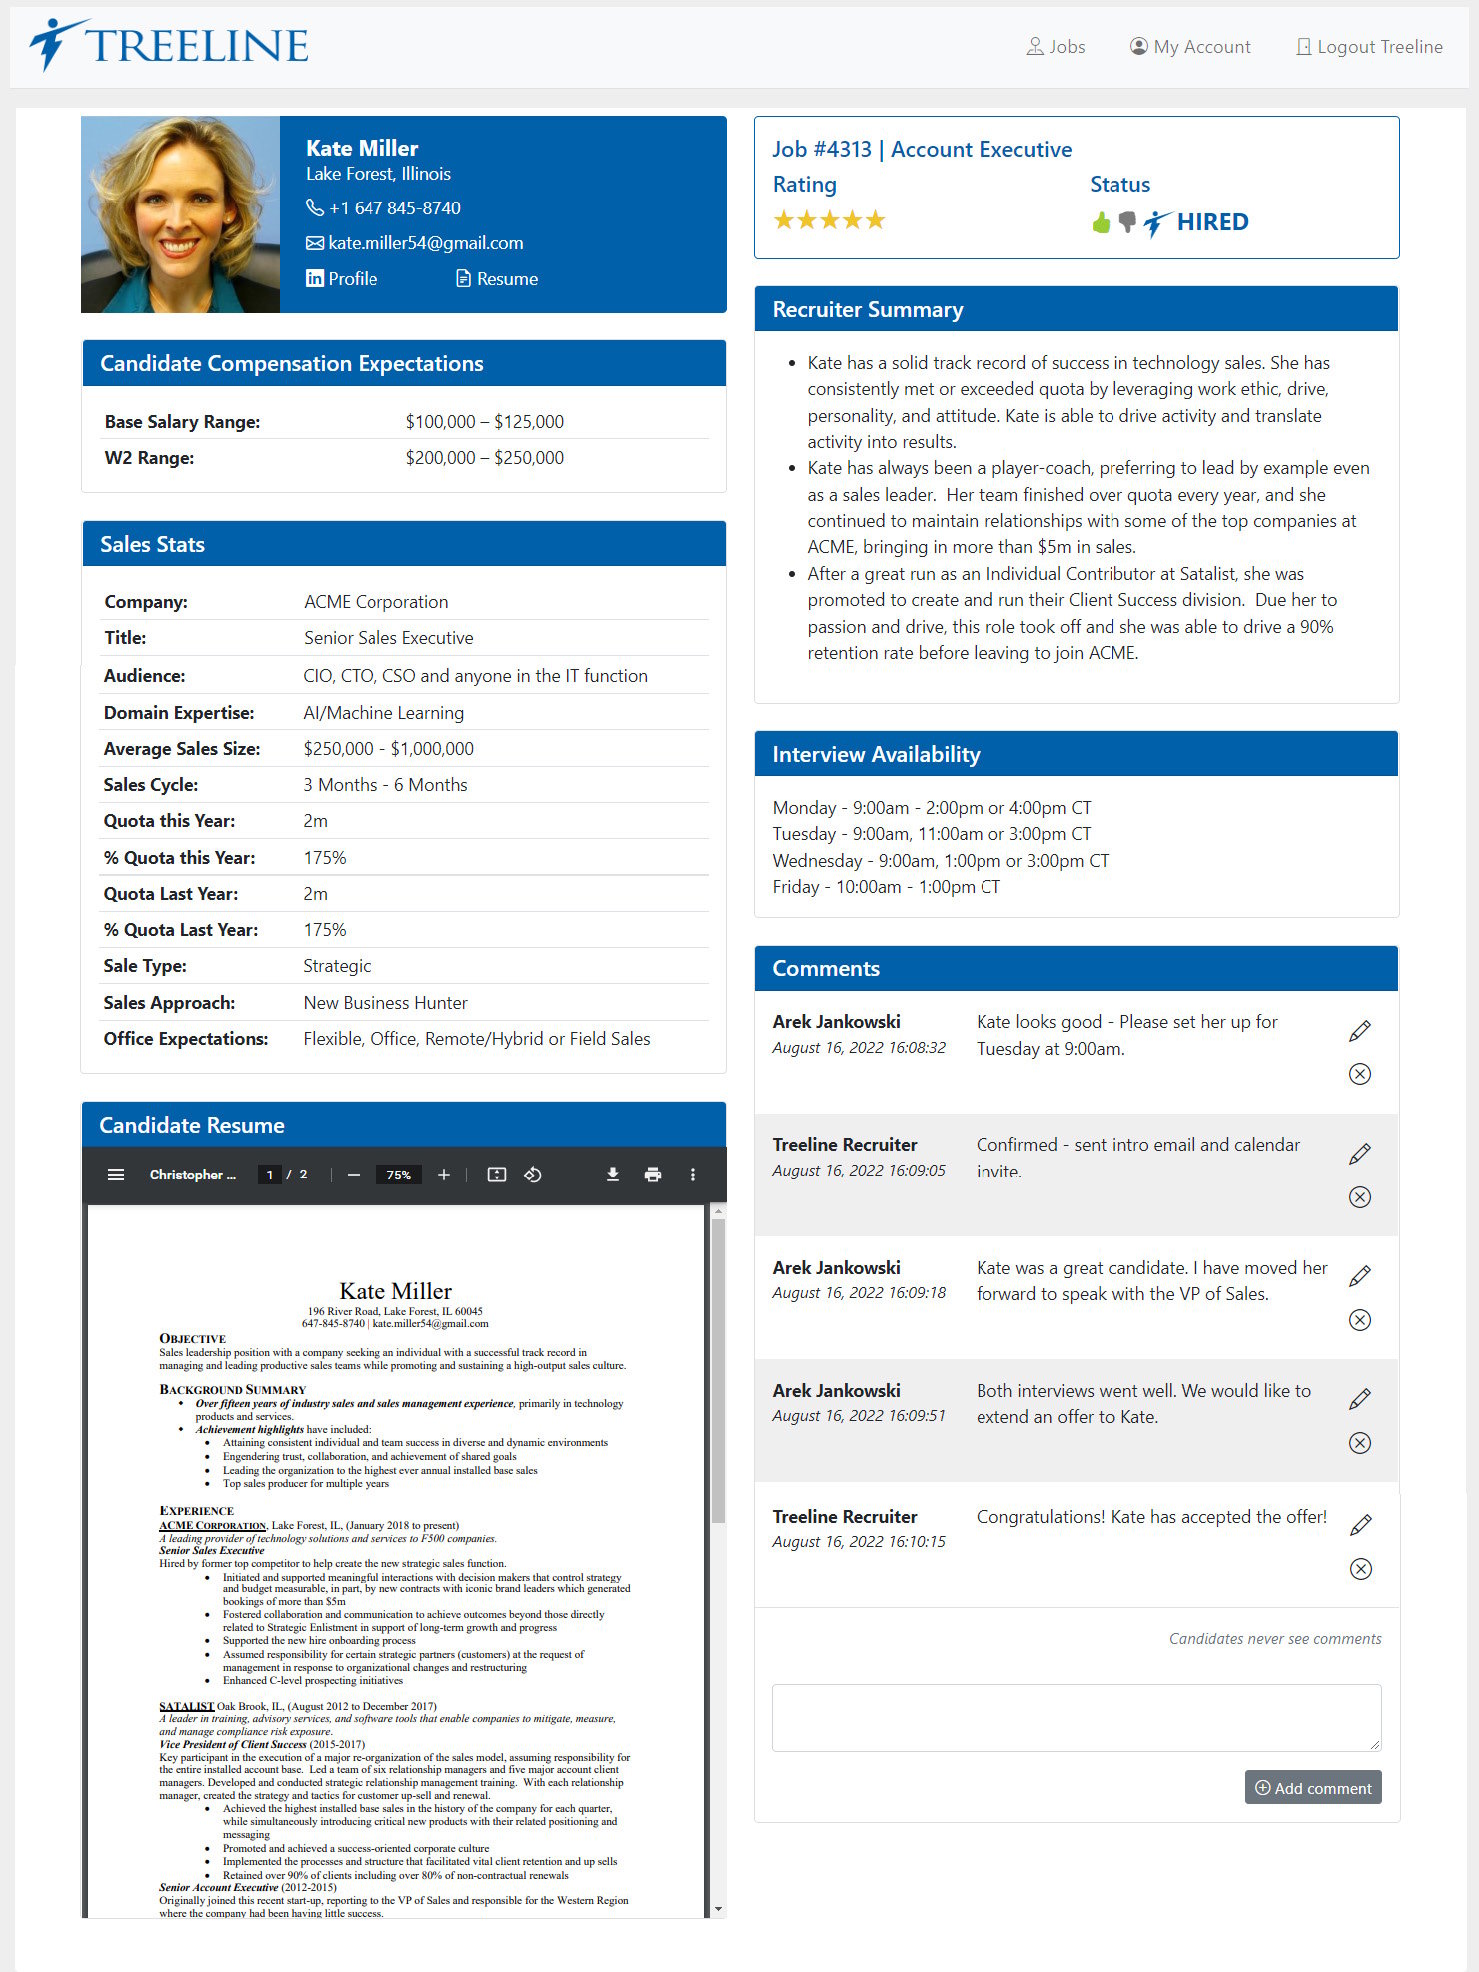 resume sample with sales stats, candidate summary and introduction as well as links to their resume and Linkedin.